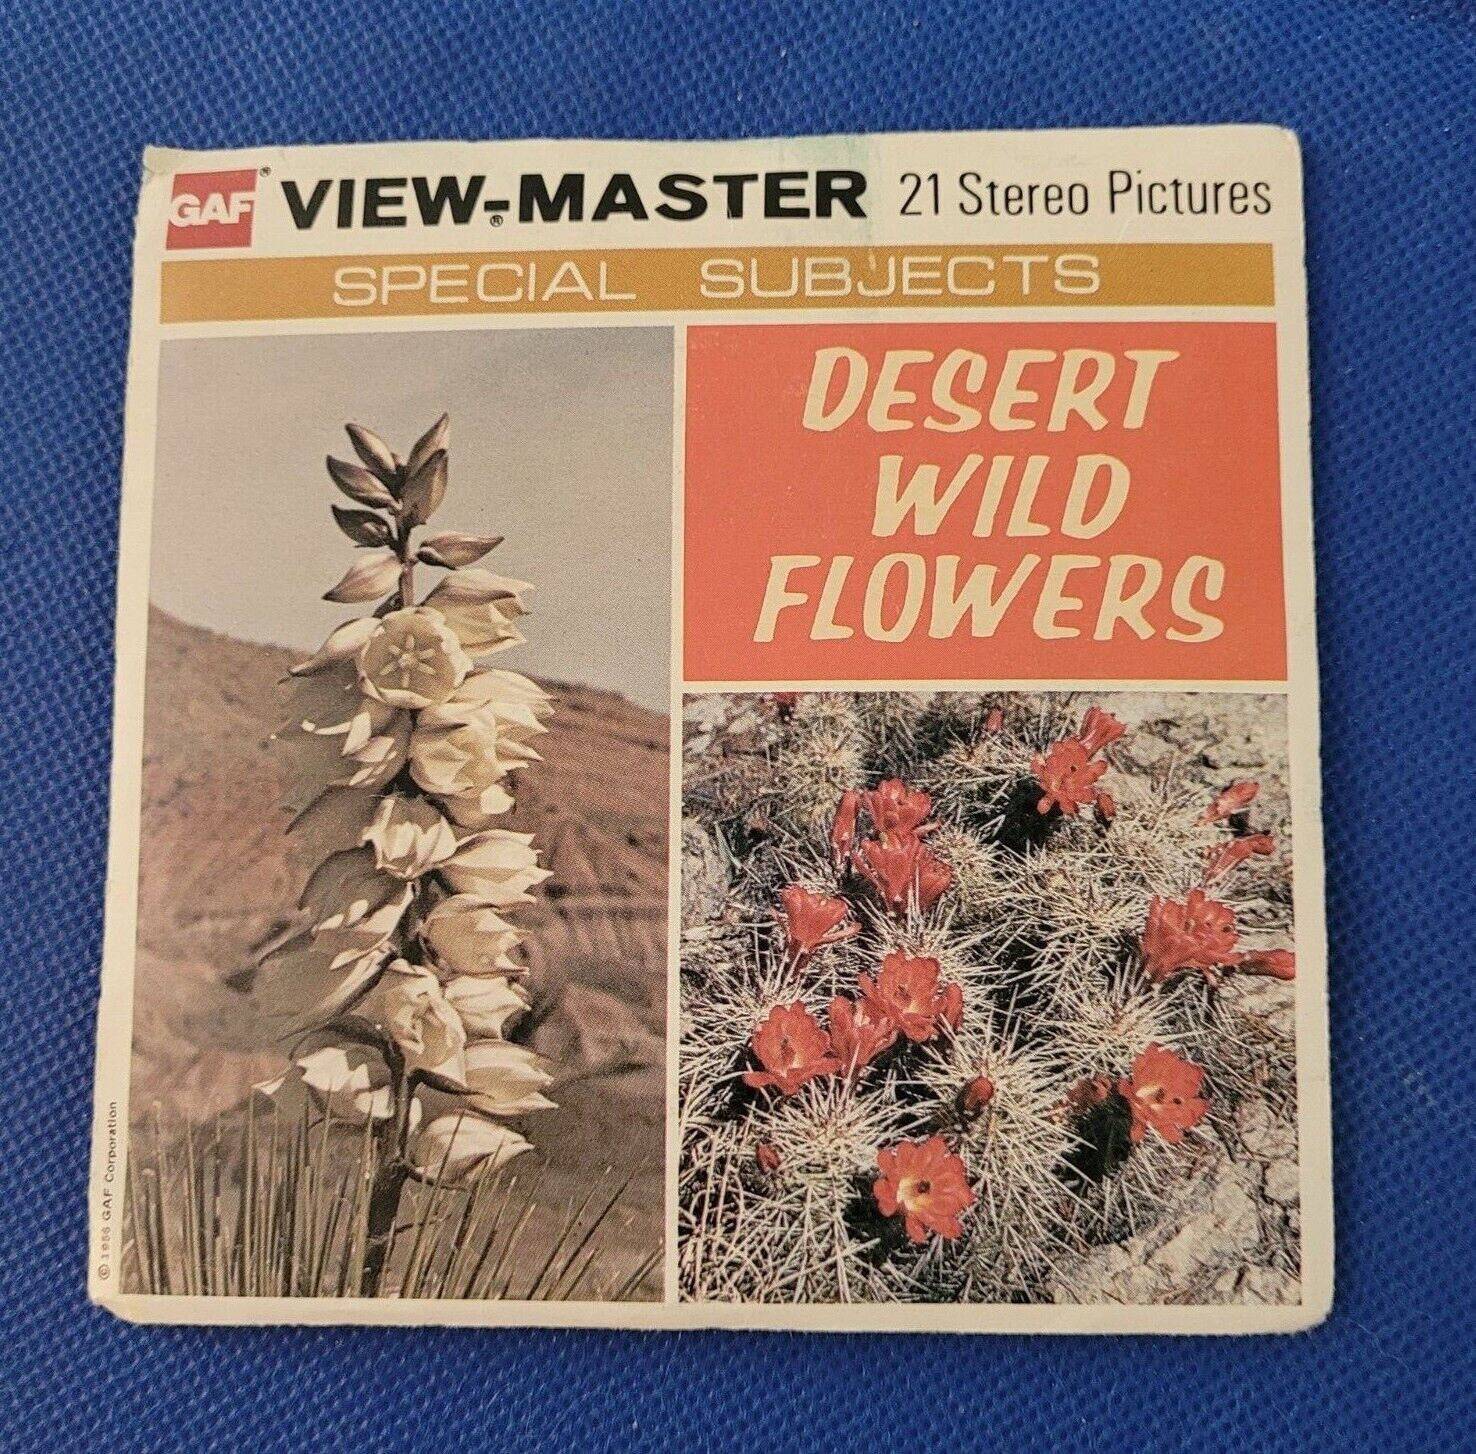 COLOR Gaf Special Subjects B629 Desert Wild Flowers view-master 3 Reels Packet